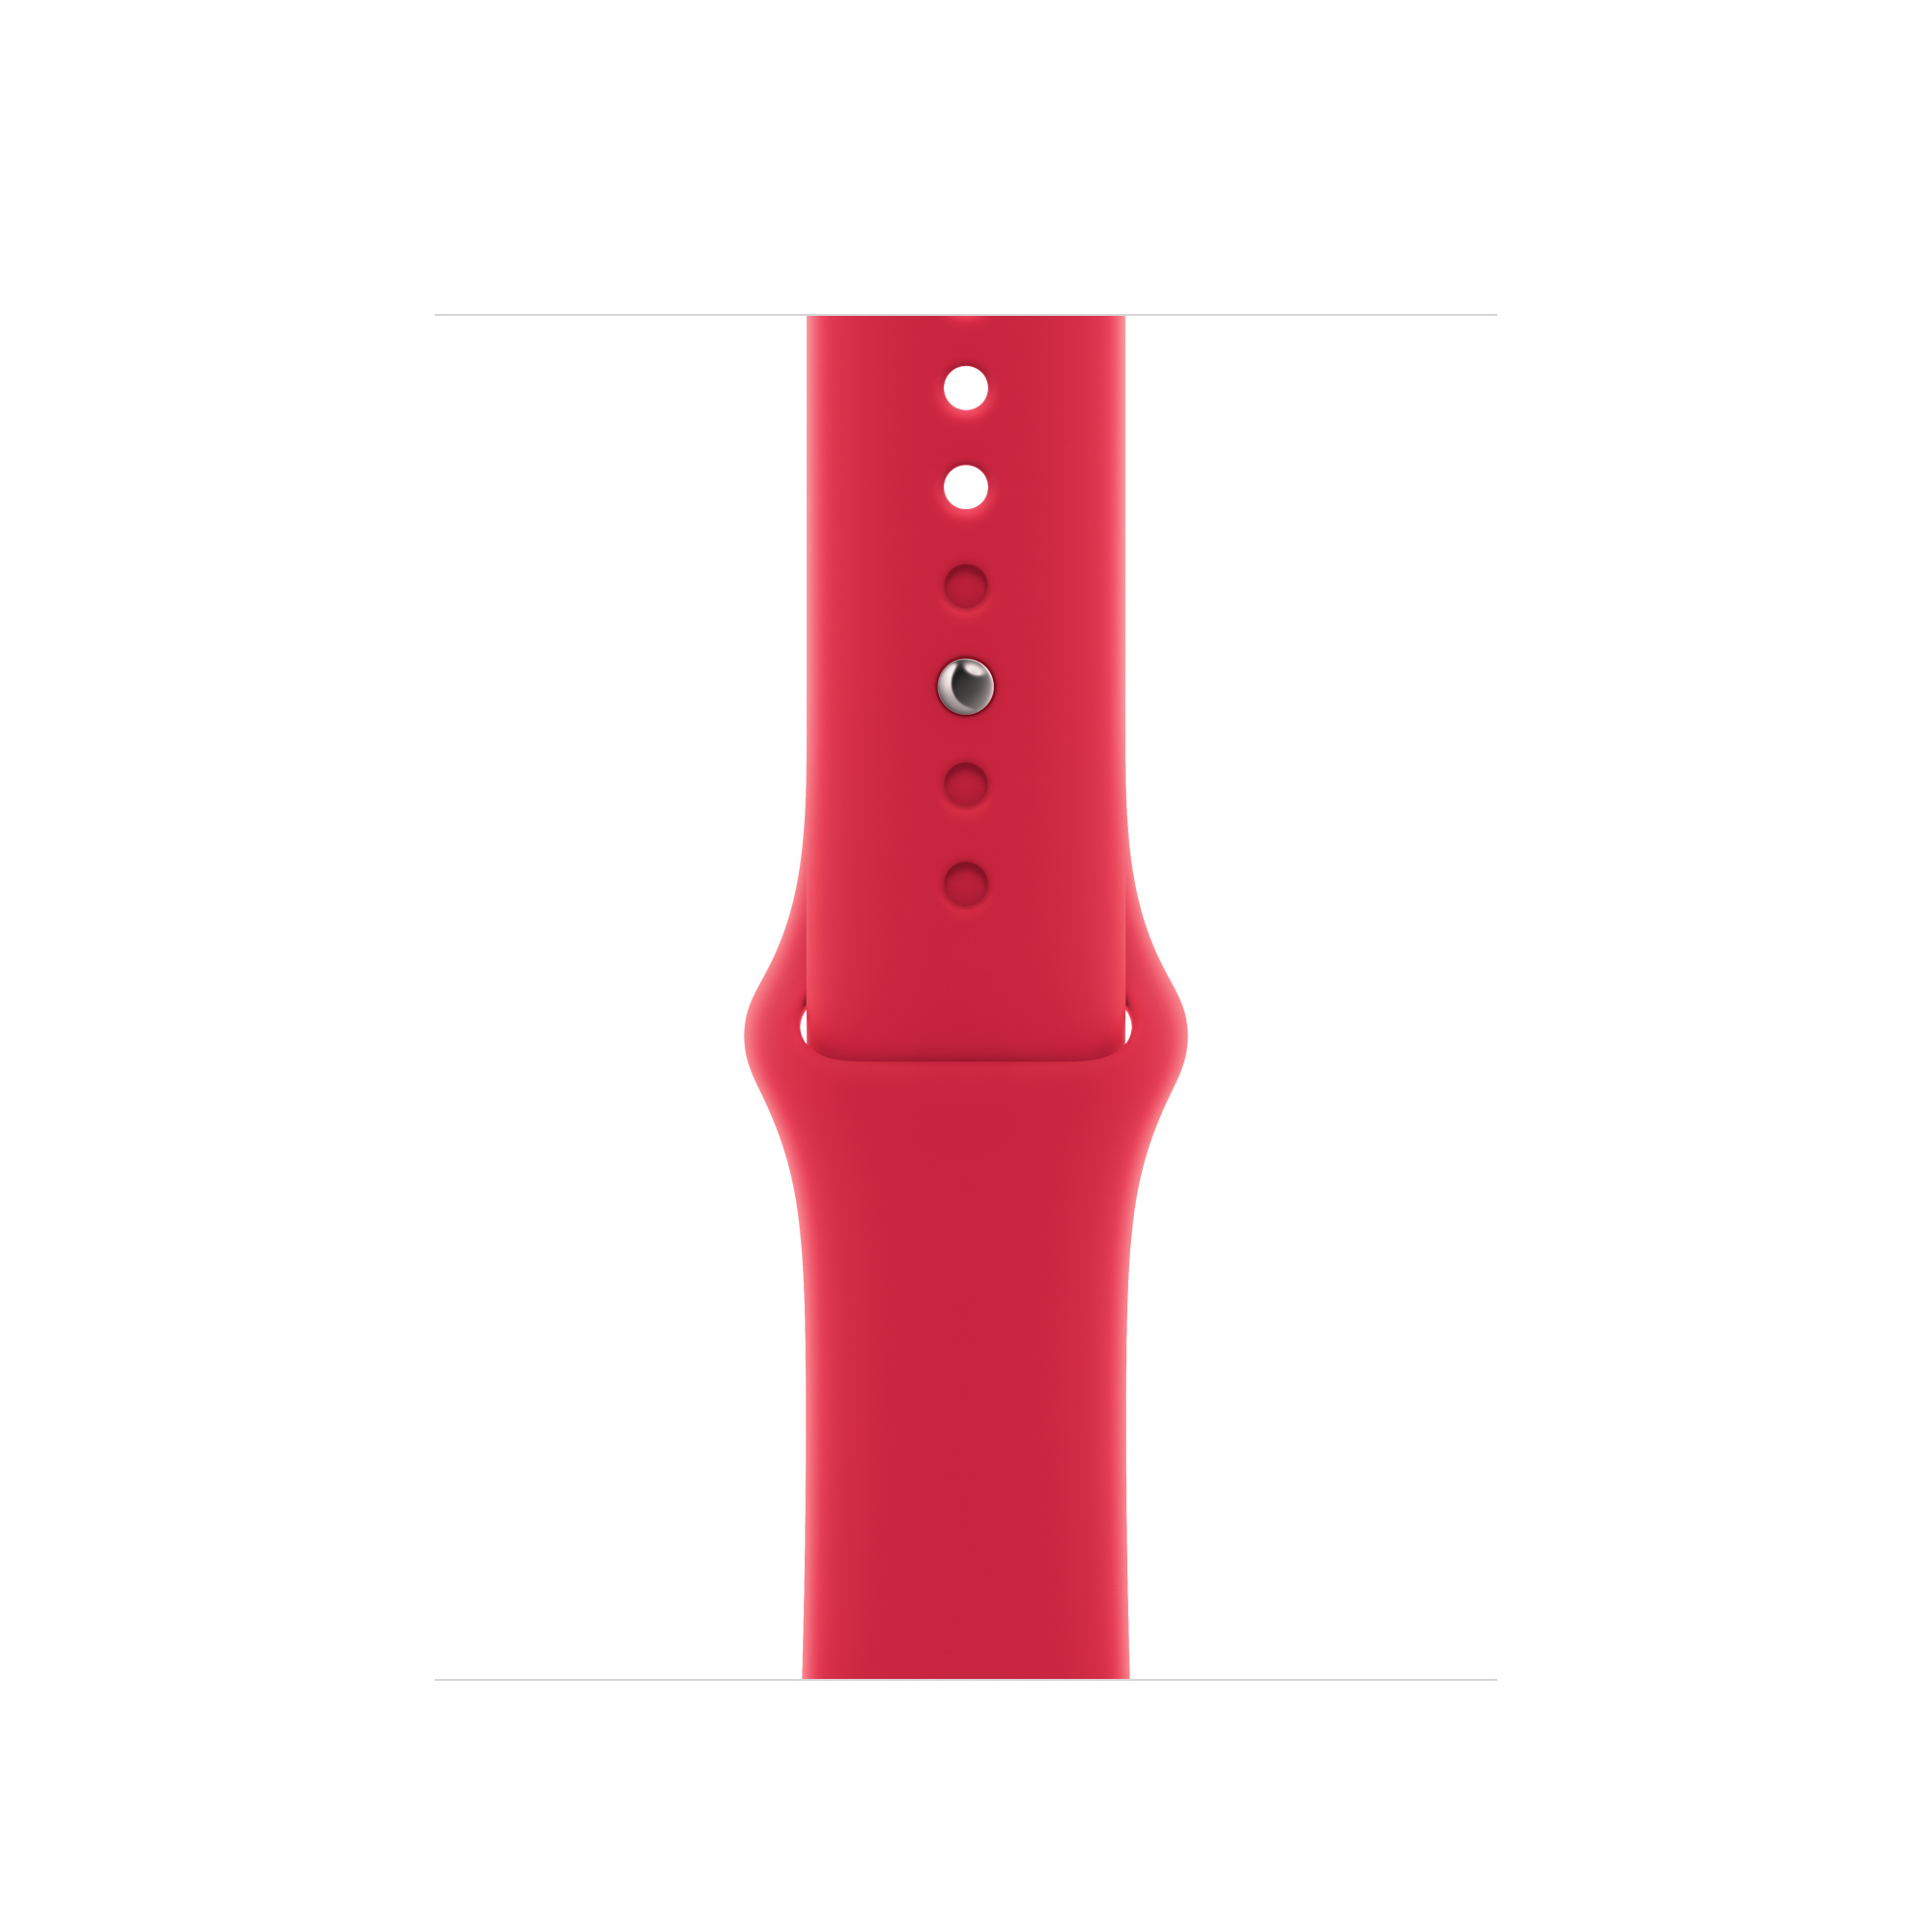 Apple 41mm Sport Band for Apple Watch - (Product)Red